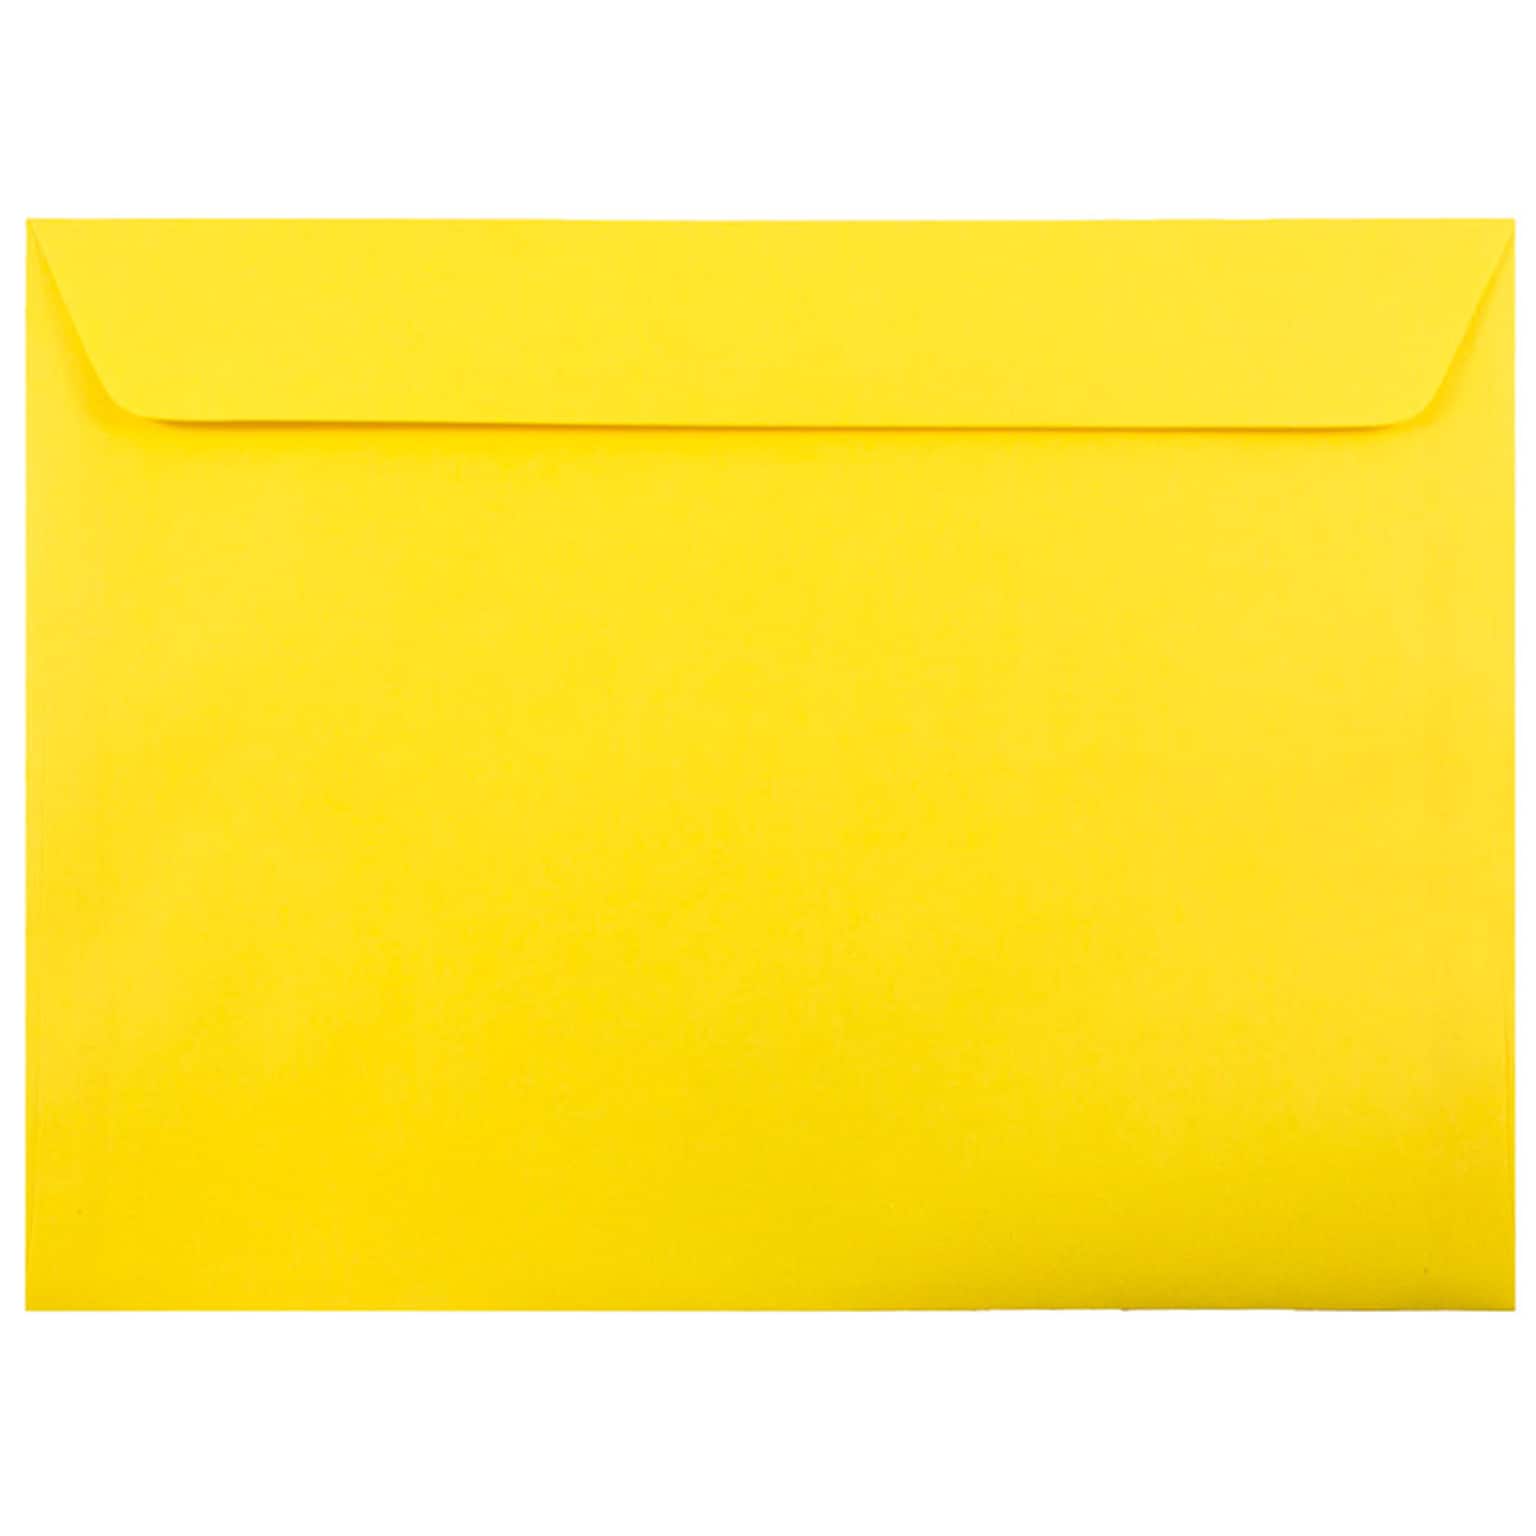 JAM Paper 9 x 12 Booklet Colored Envelopes, Yellow Recycled, 25/Pack (5156775)